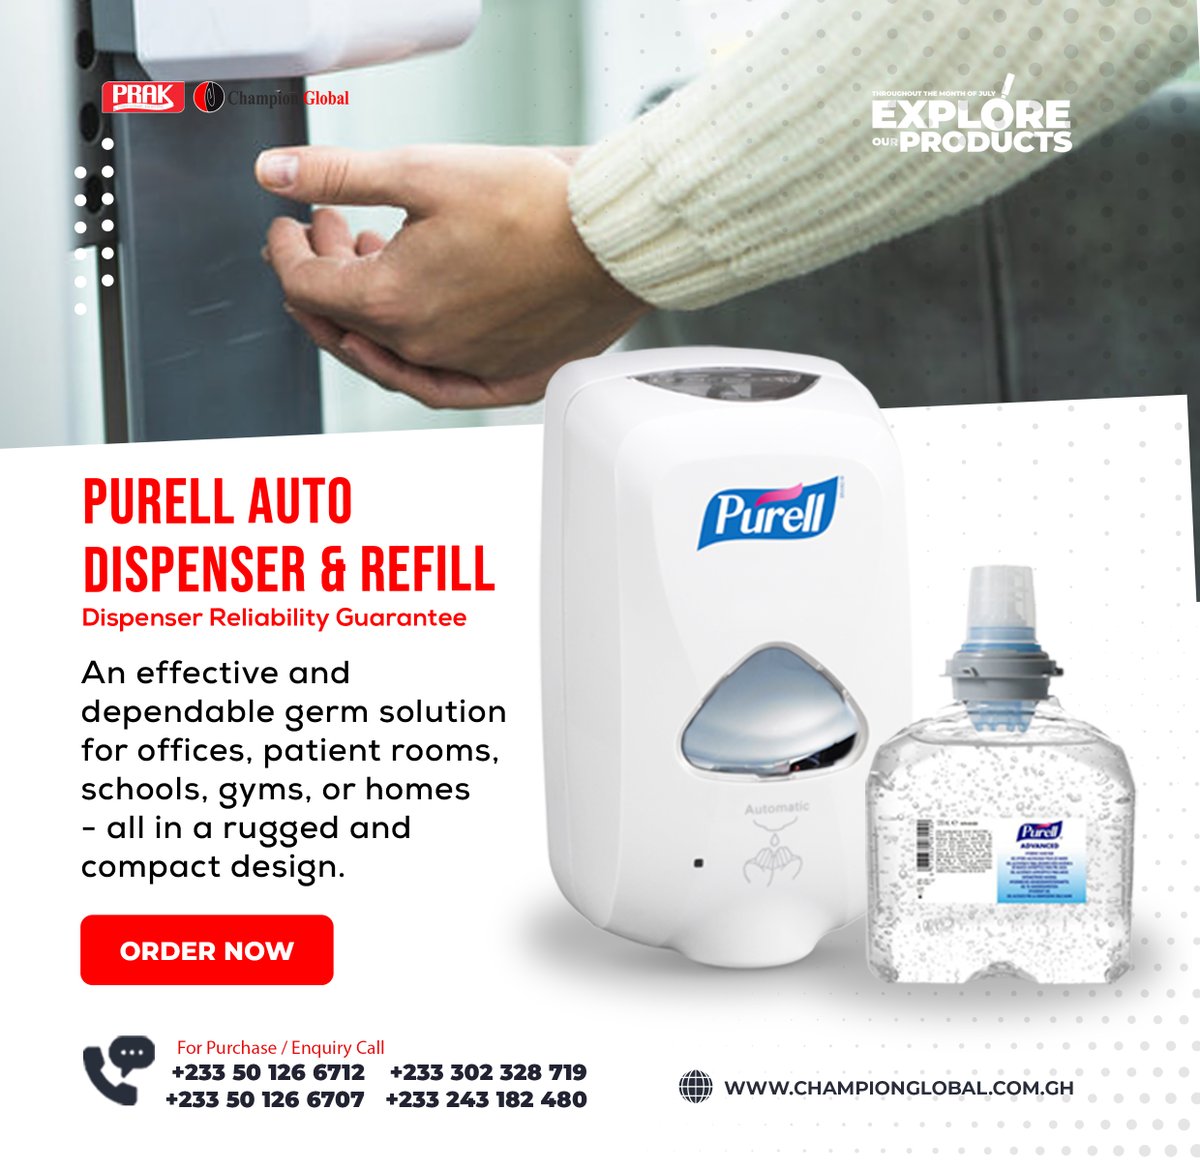 Wooww!!! An effective and dependable germ solution for offices, patient rooms, schools, gyms, or homes - all in a rugged and compact design.

#handsanitizer
#killsgerms
#ordernow